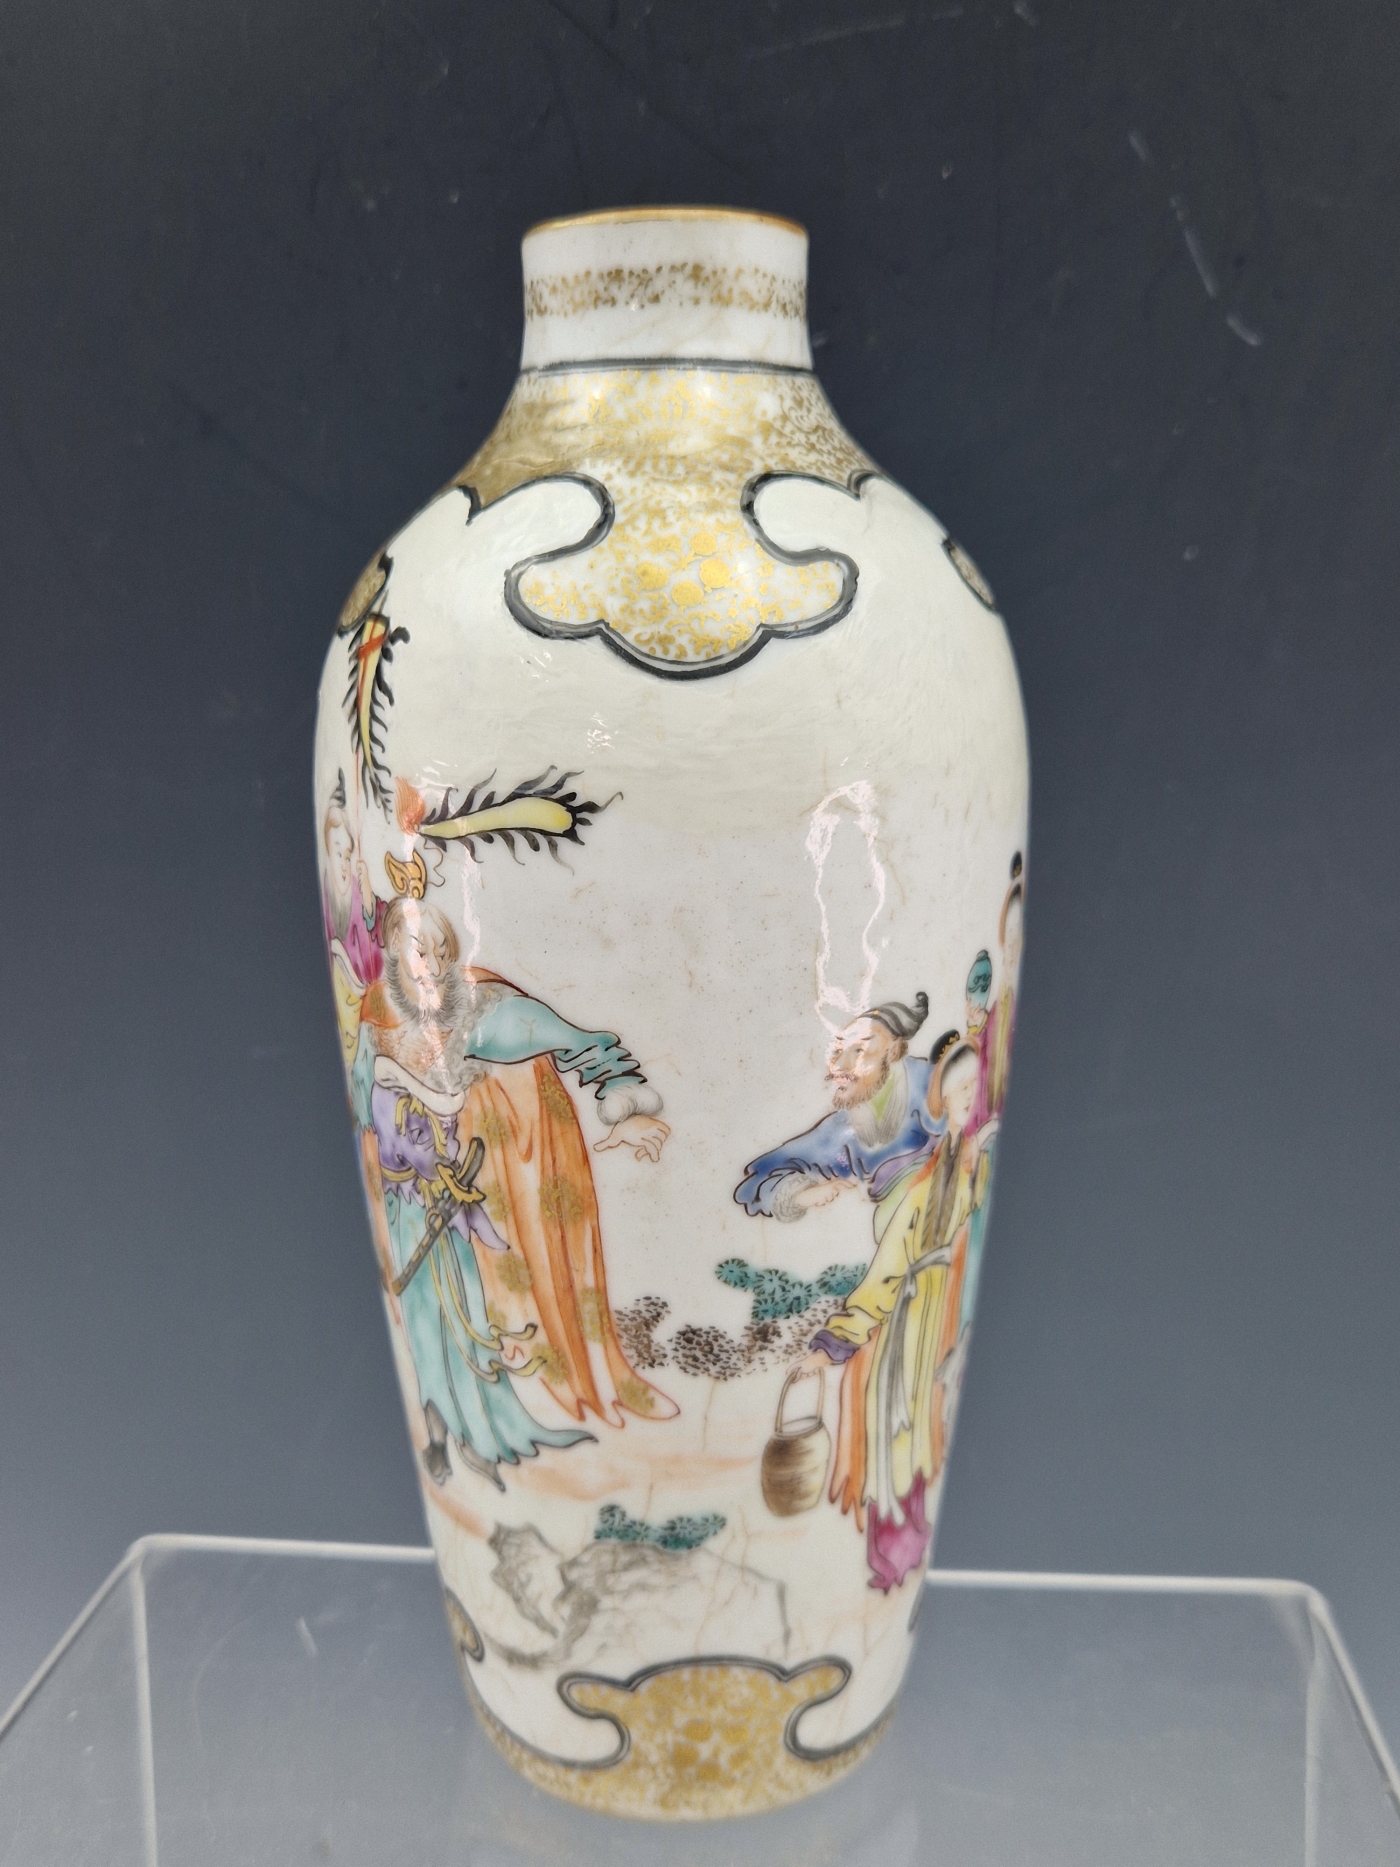 A LATE 18th C. CHINESE VASE PAINTED WITH GUANDI AND OTHER FIGURES IN A LANDSCAPE AND BETWEEN BLACK - Image 7 of 8